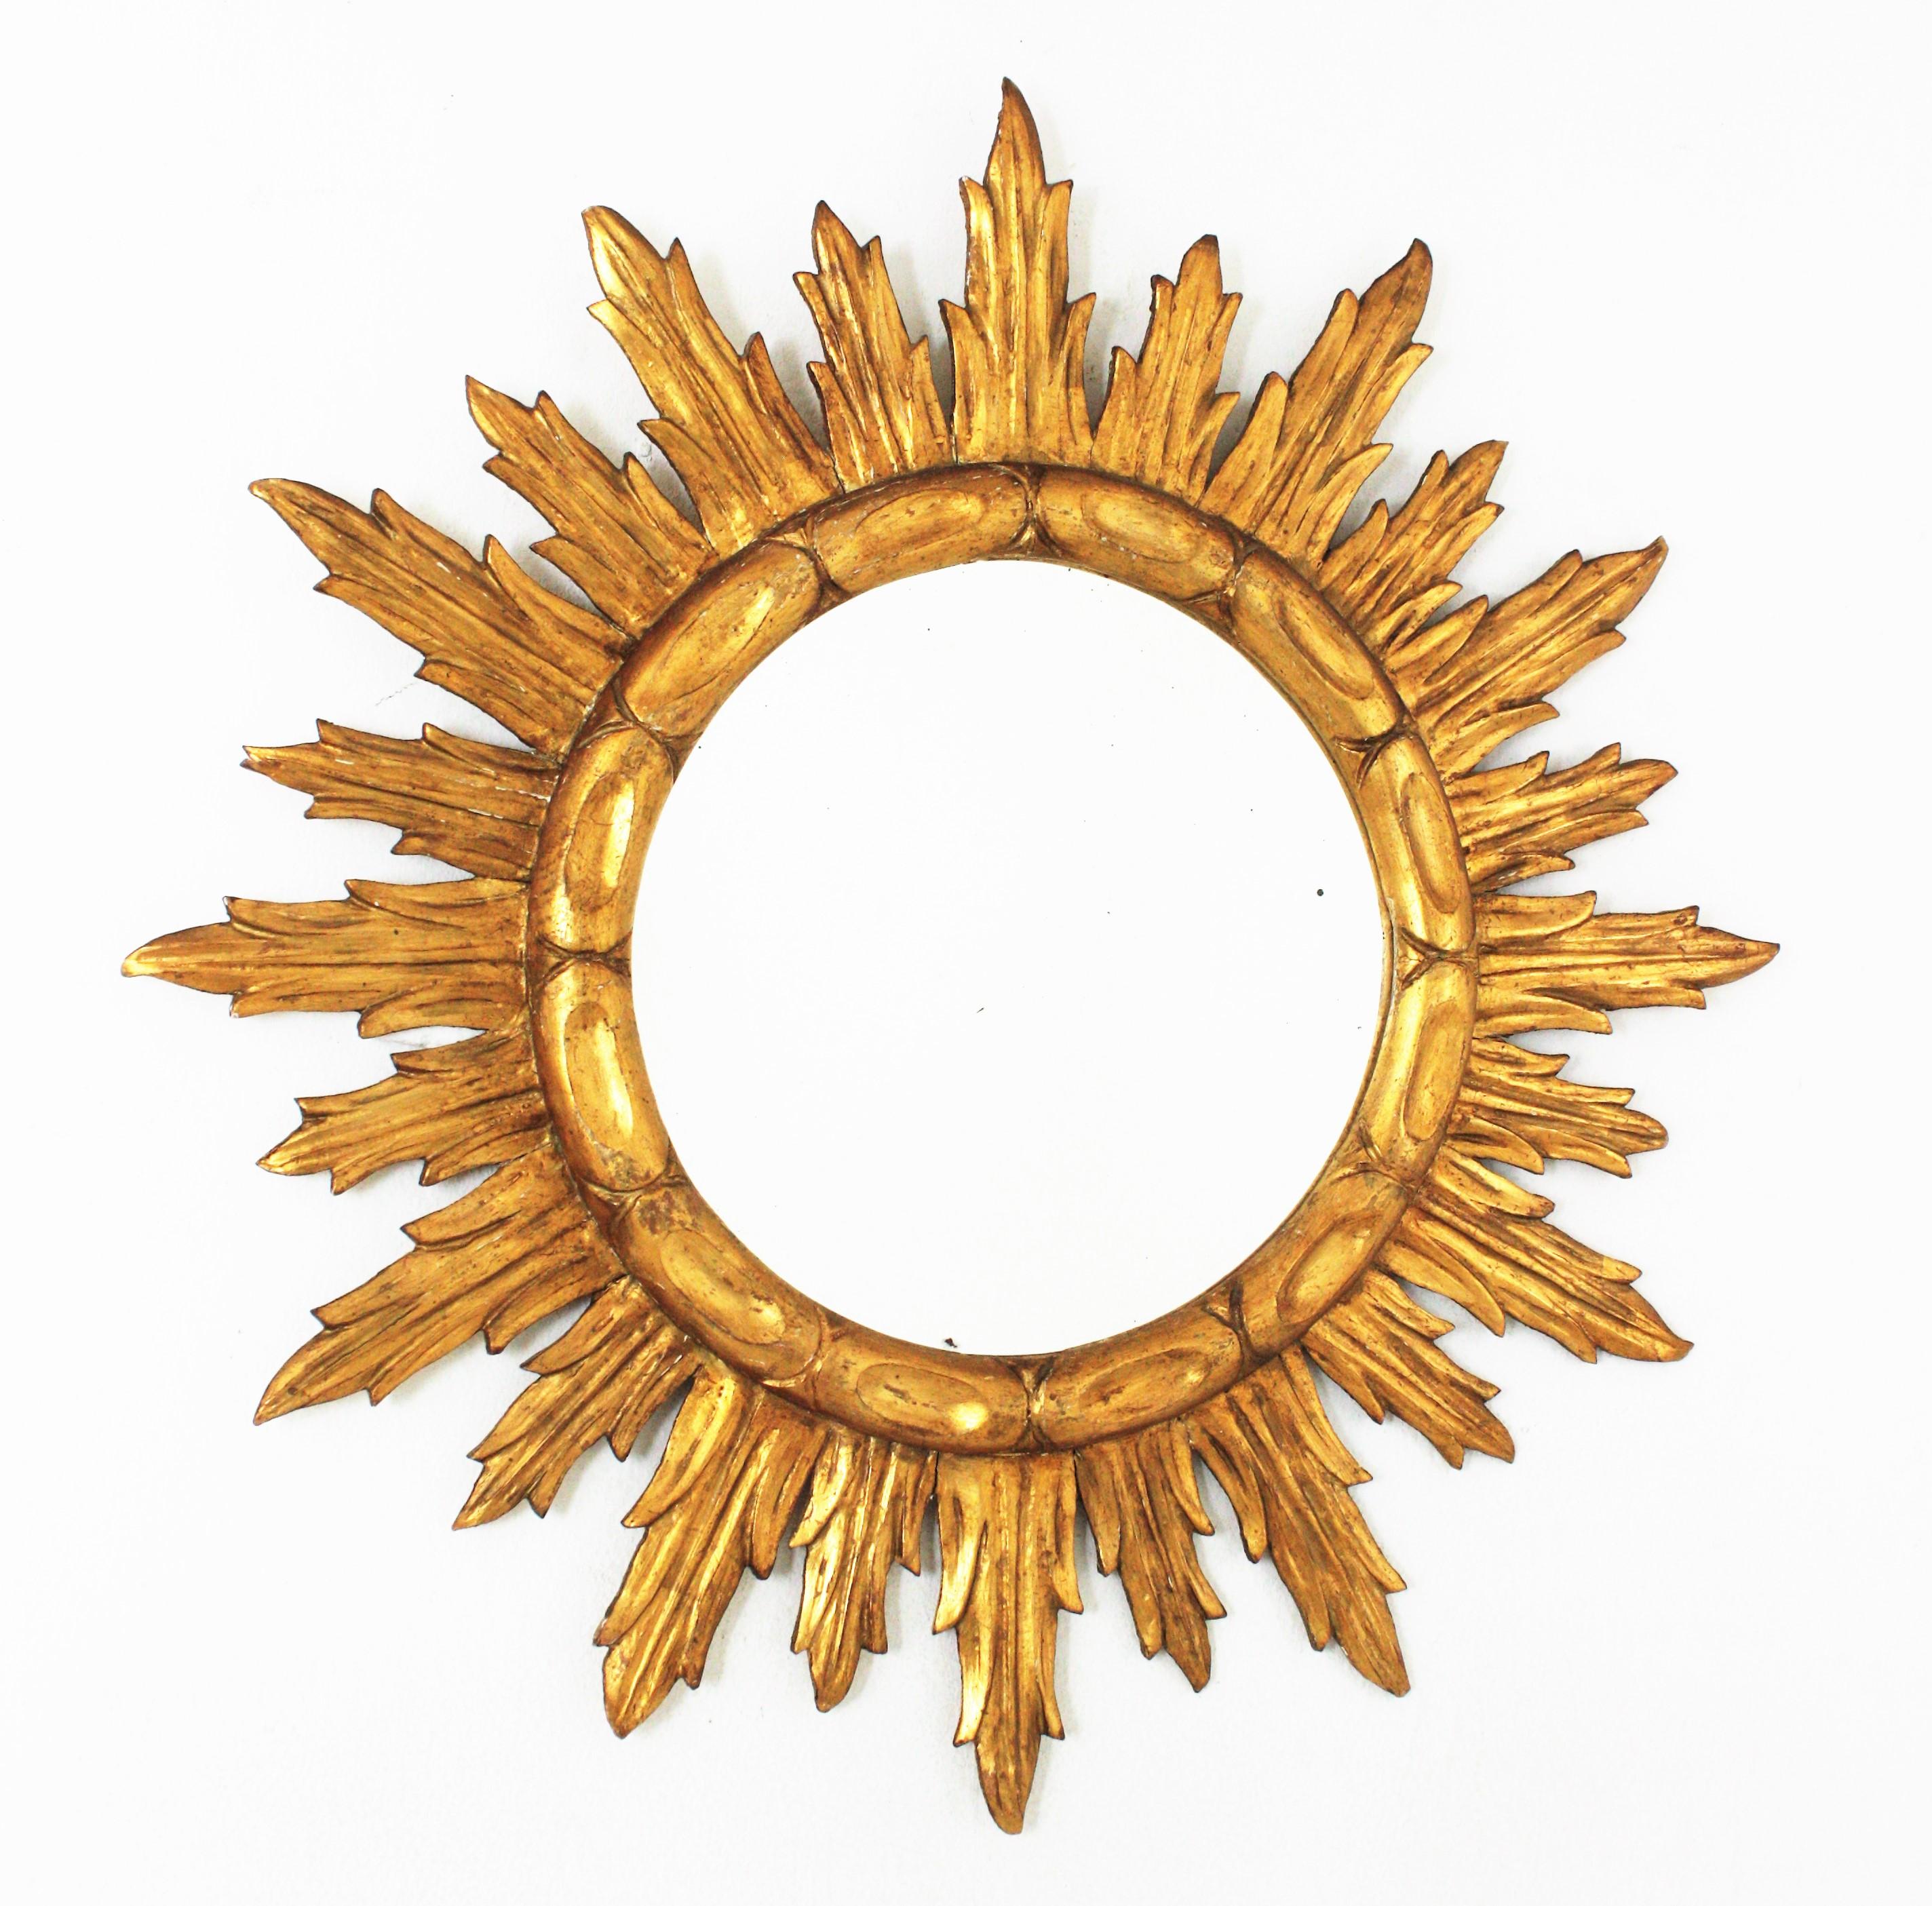 Outstanding finely carved and gilded wood sunburst mirror. Spain, 1940s-1950s
Carved wood and gold leaf gilding. The frame has finely carved rays in two sizes and a patterned round ring surrounding the central glass. It has a nice patina showing